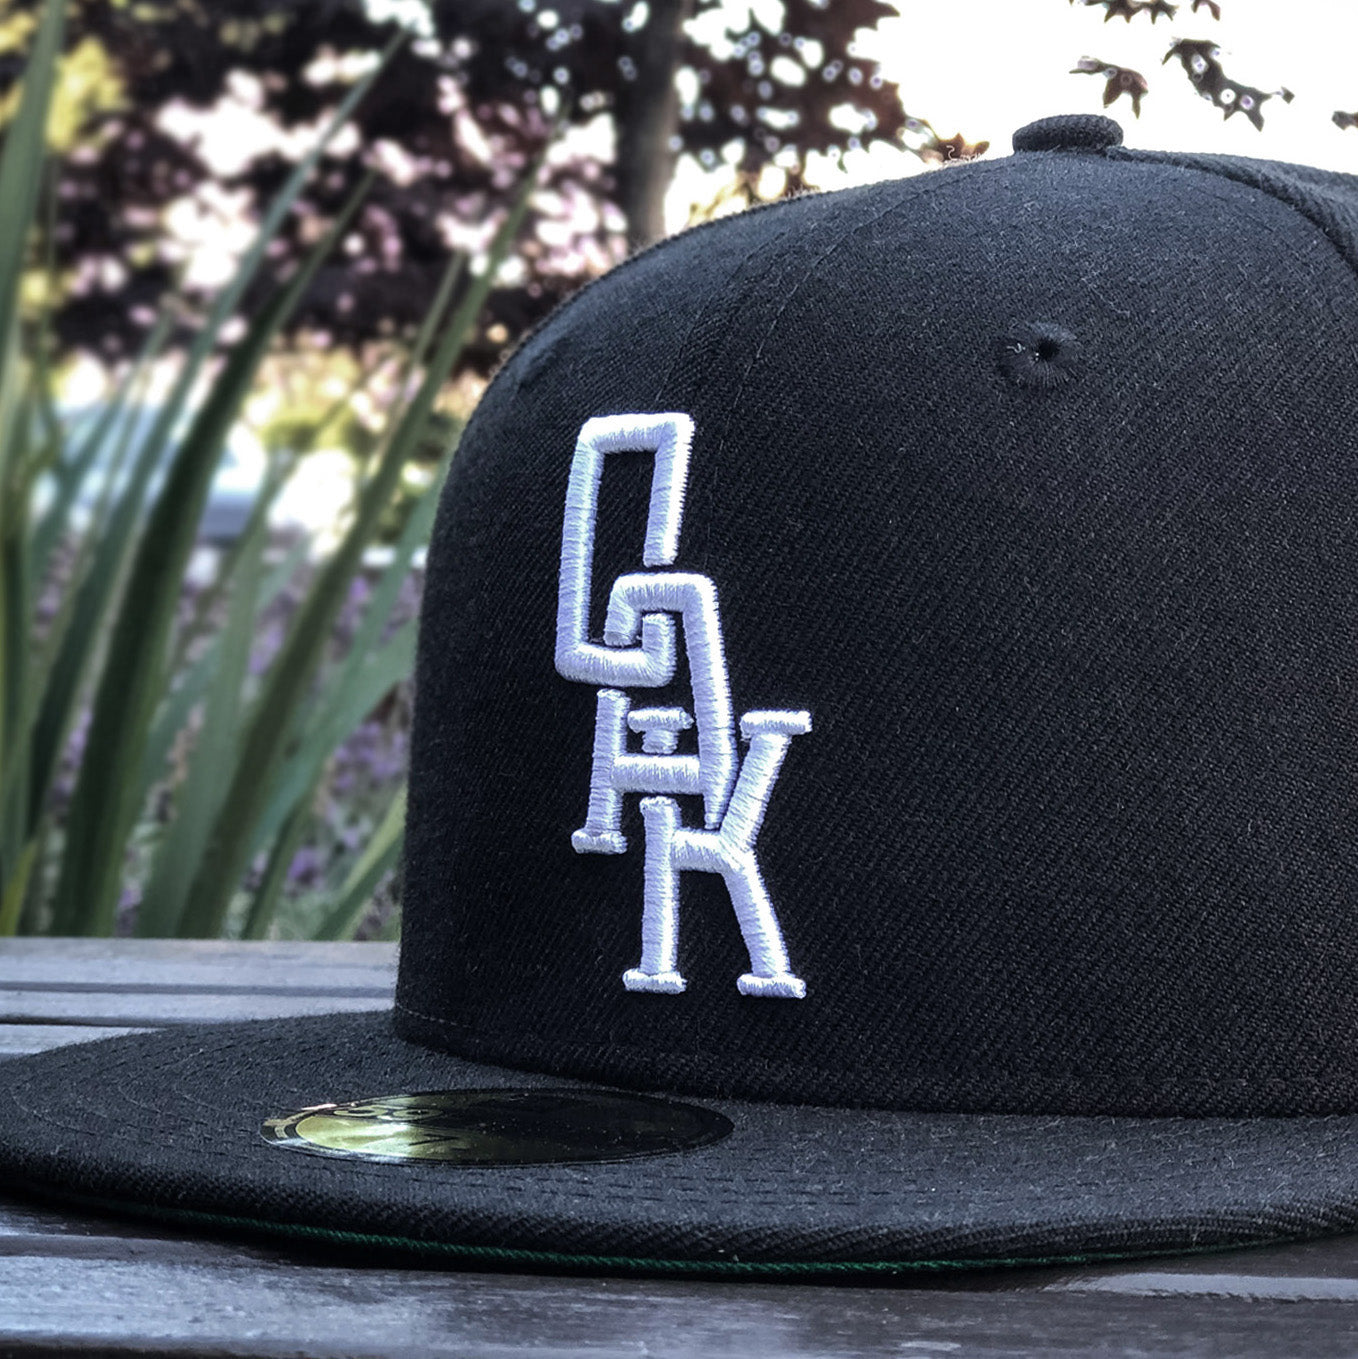 Black New Era cap with white embroidered OAK wordmark on the crown on an outdoor picnic table.